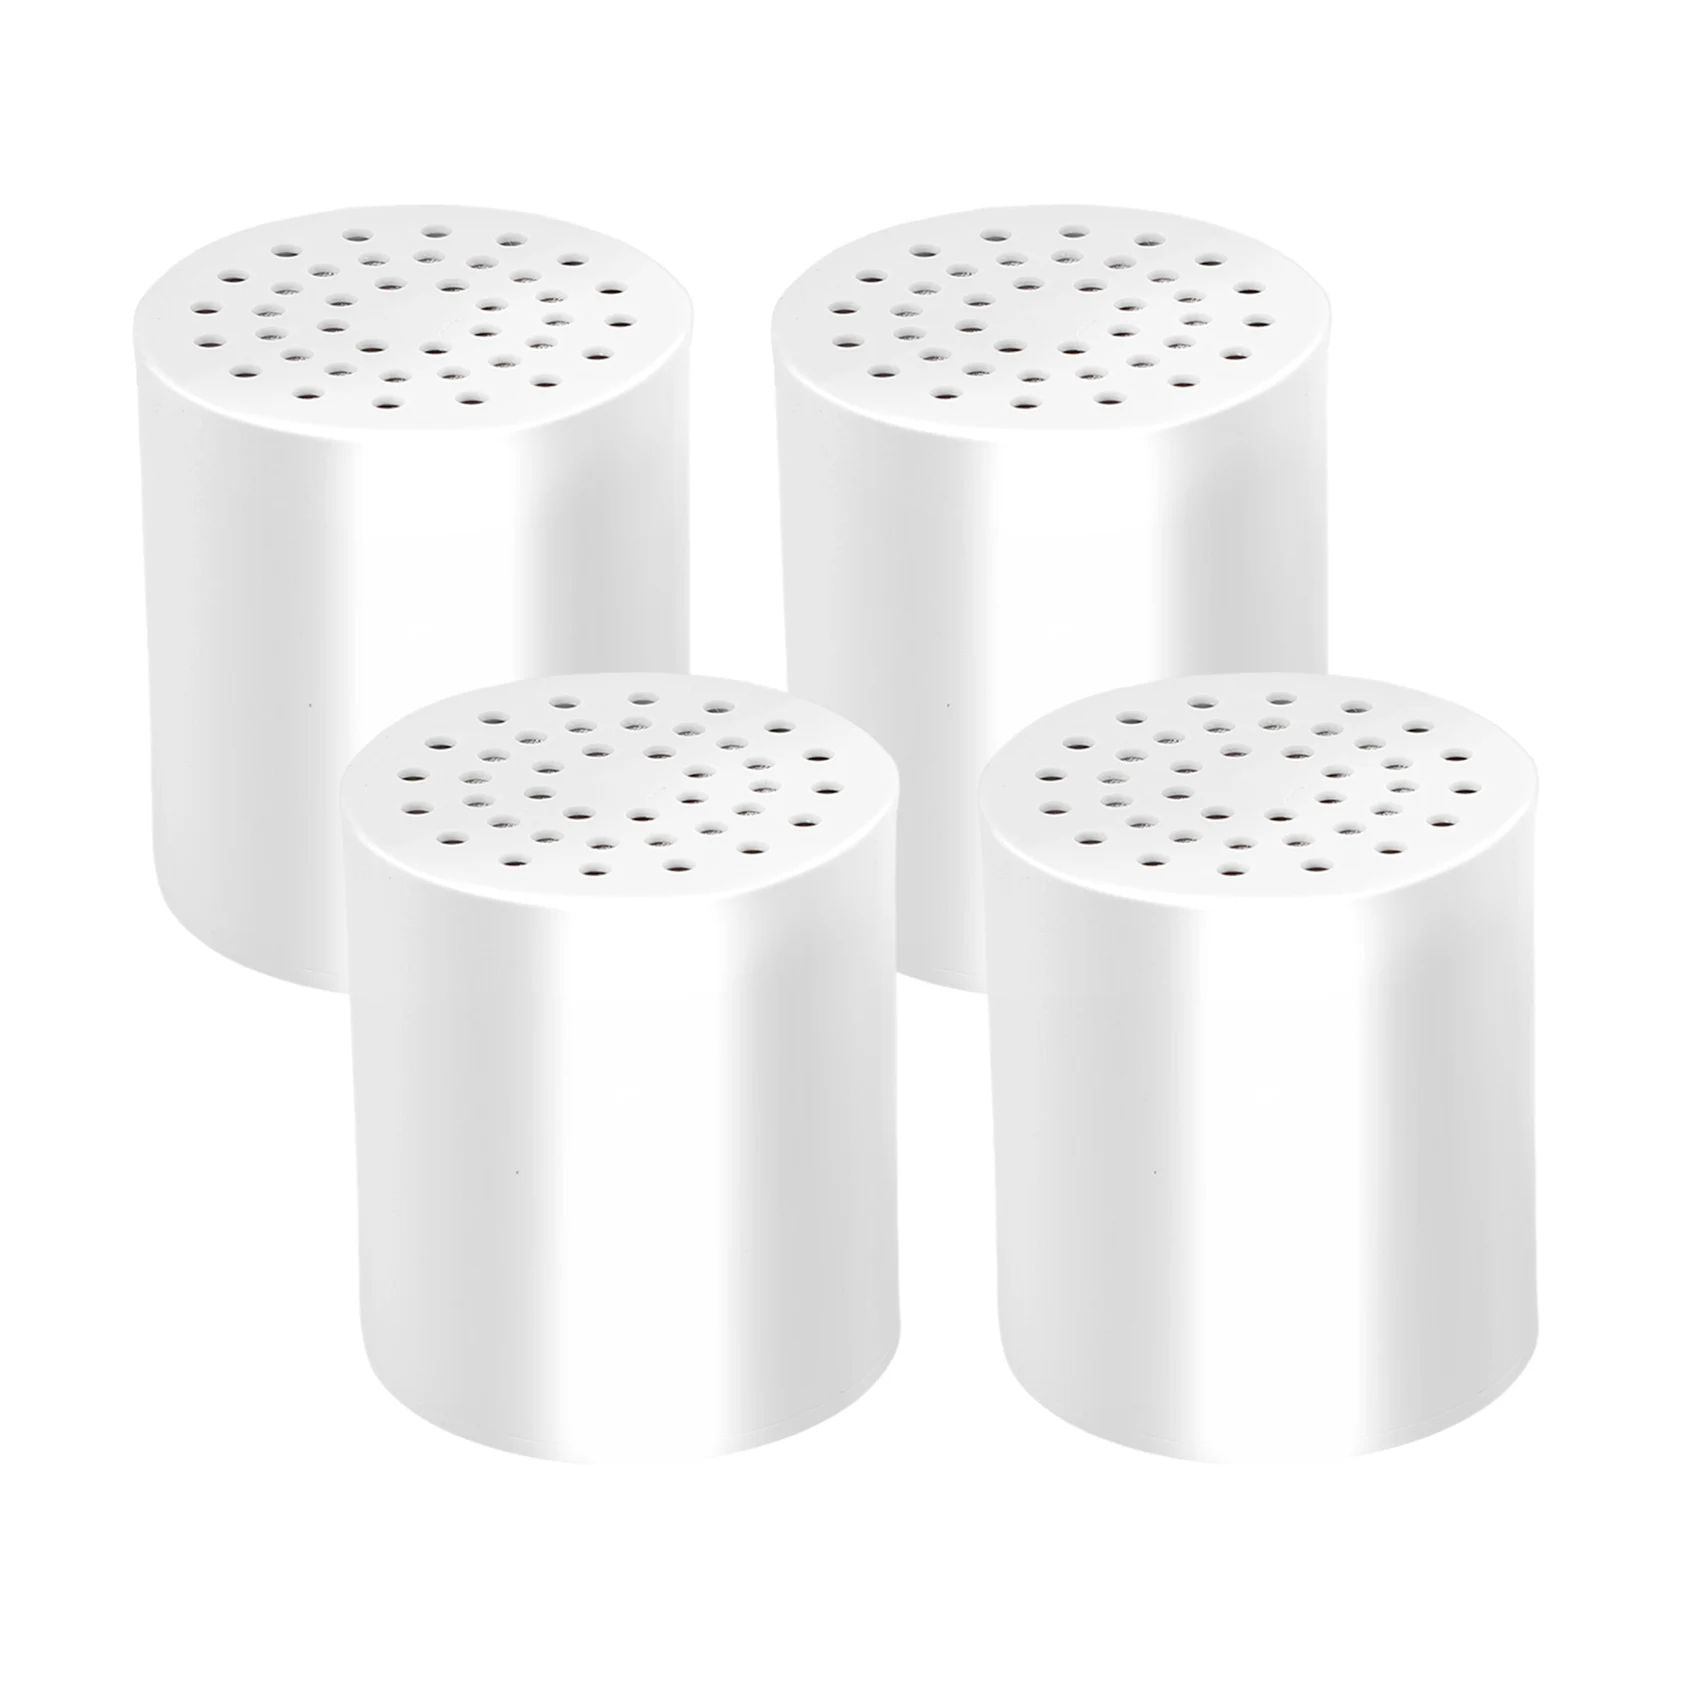 

15 Stage Universal Shower Water Filter Cartridges (4 Pack) Removes Chlorine, Microorganisms, Hard Water - Replacement